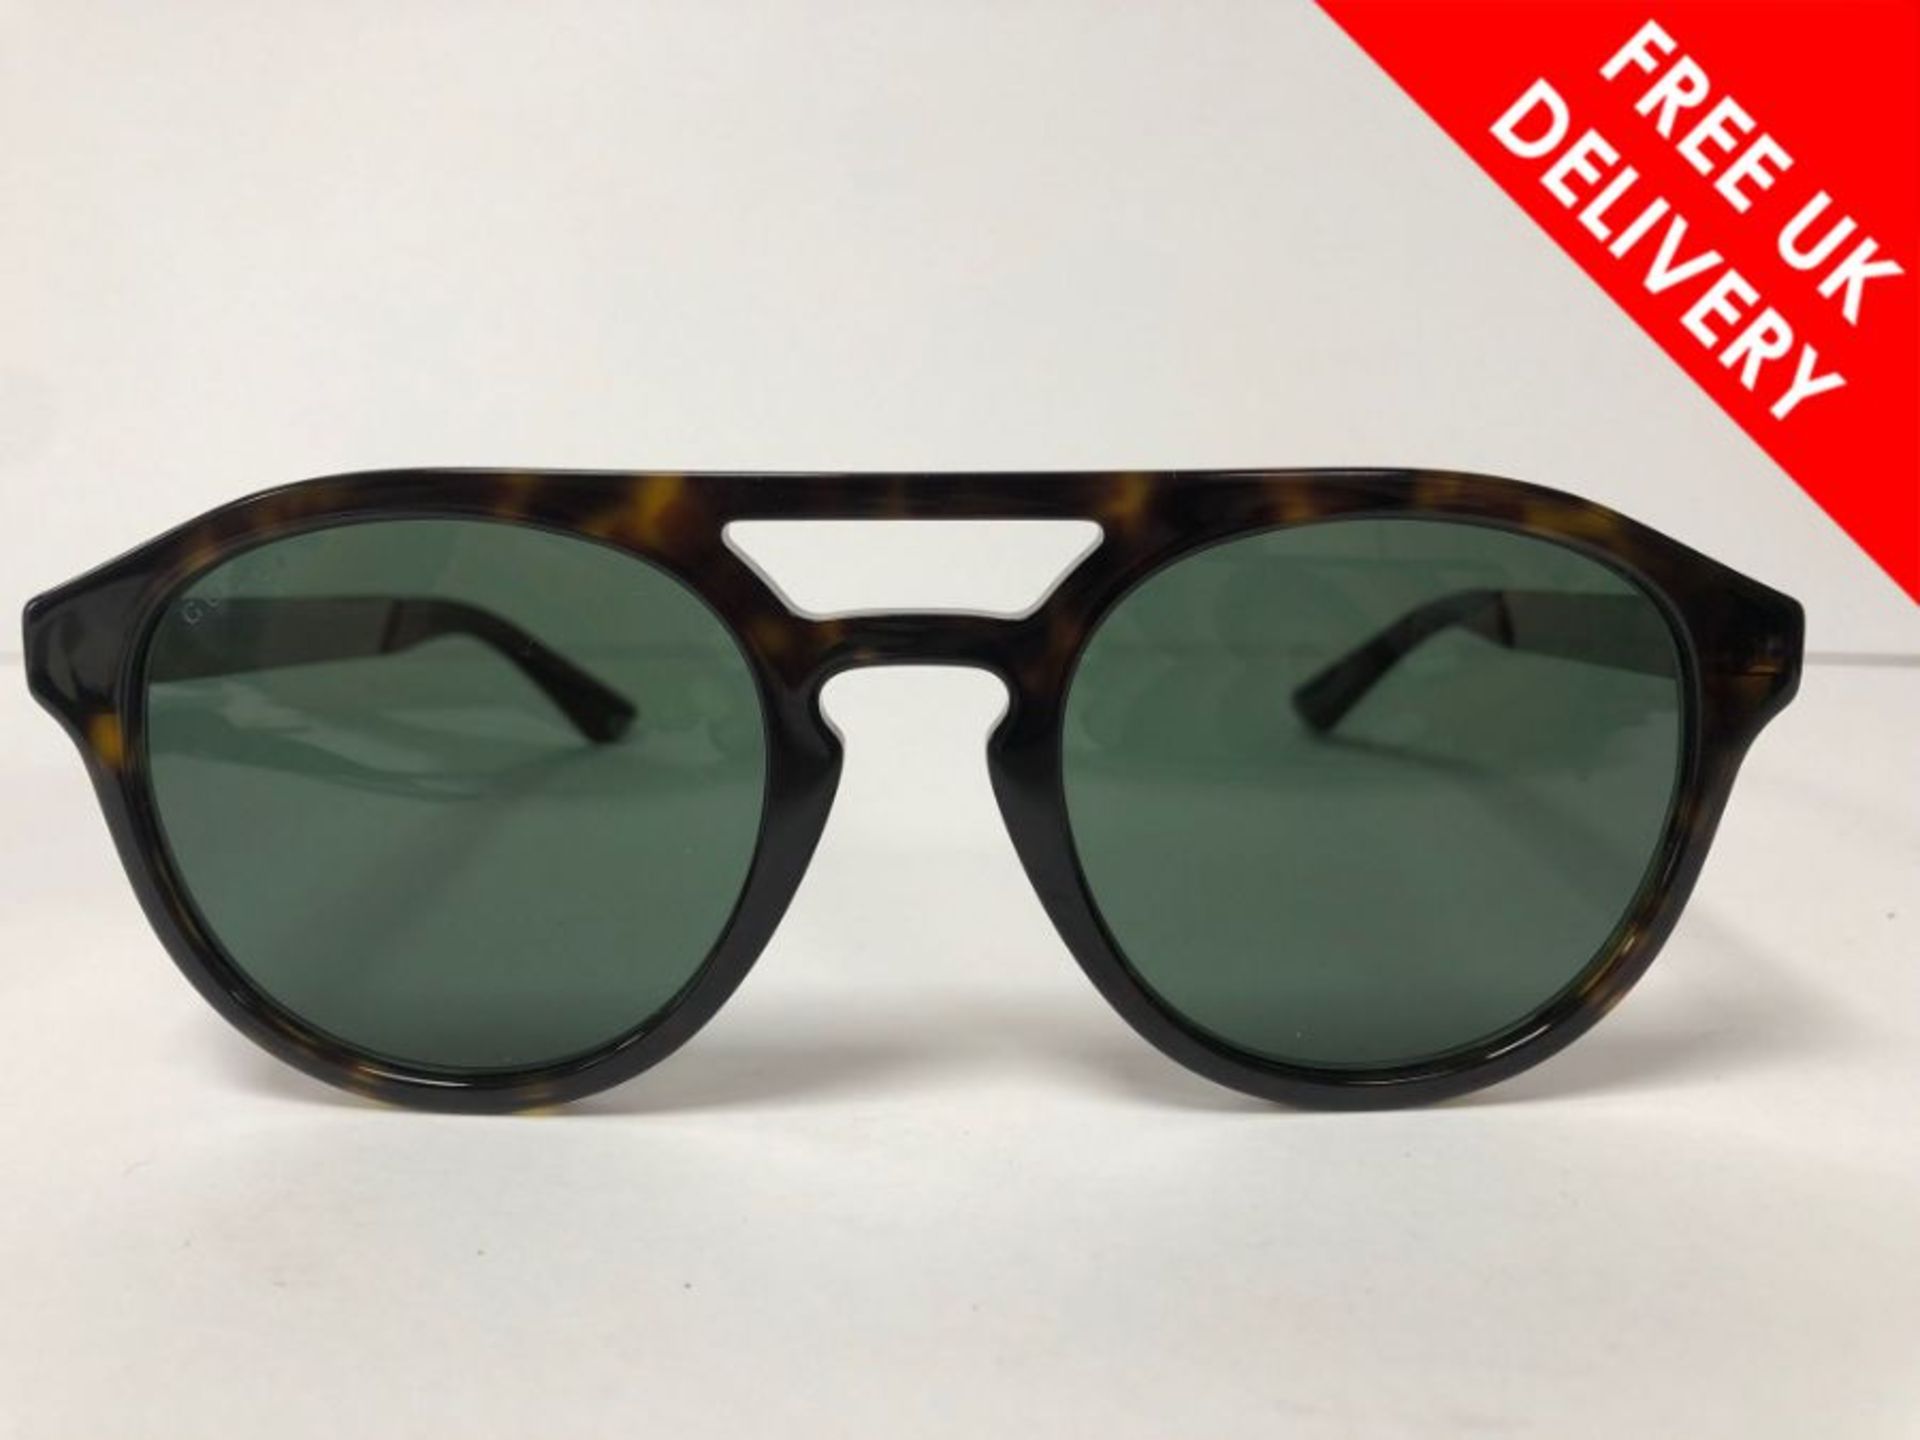 Gucci Men's Sunglasses, Mens, GG0689S Tortoise Shell with case